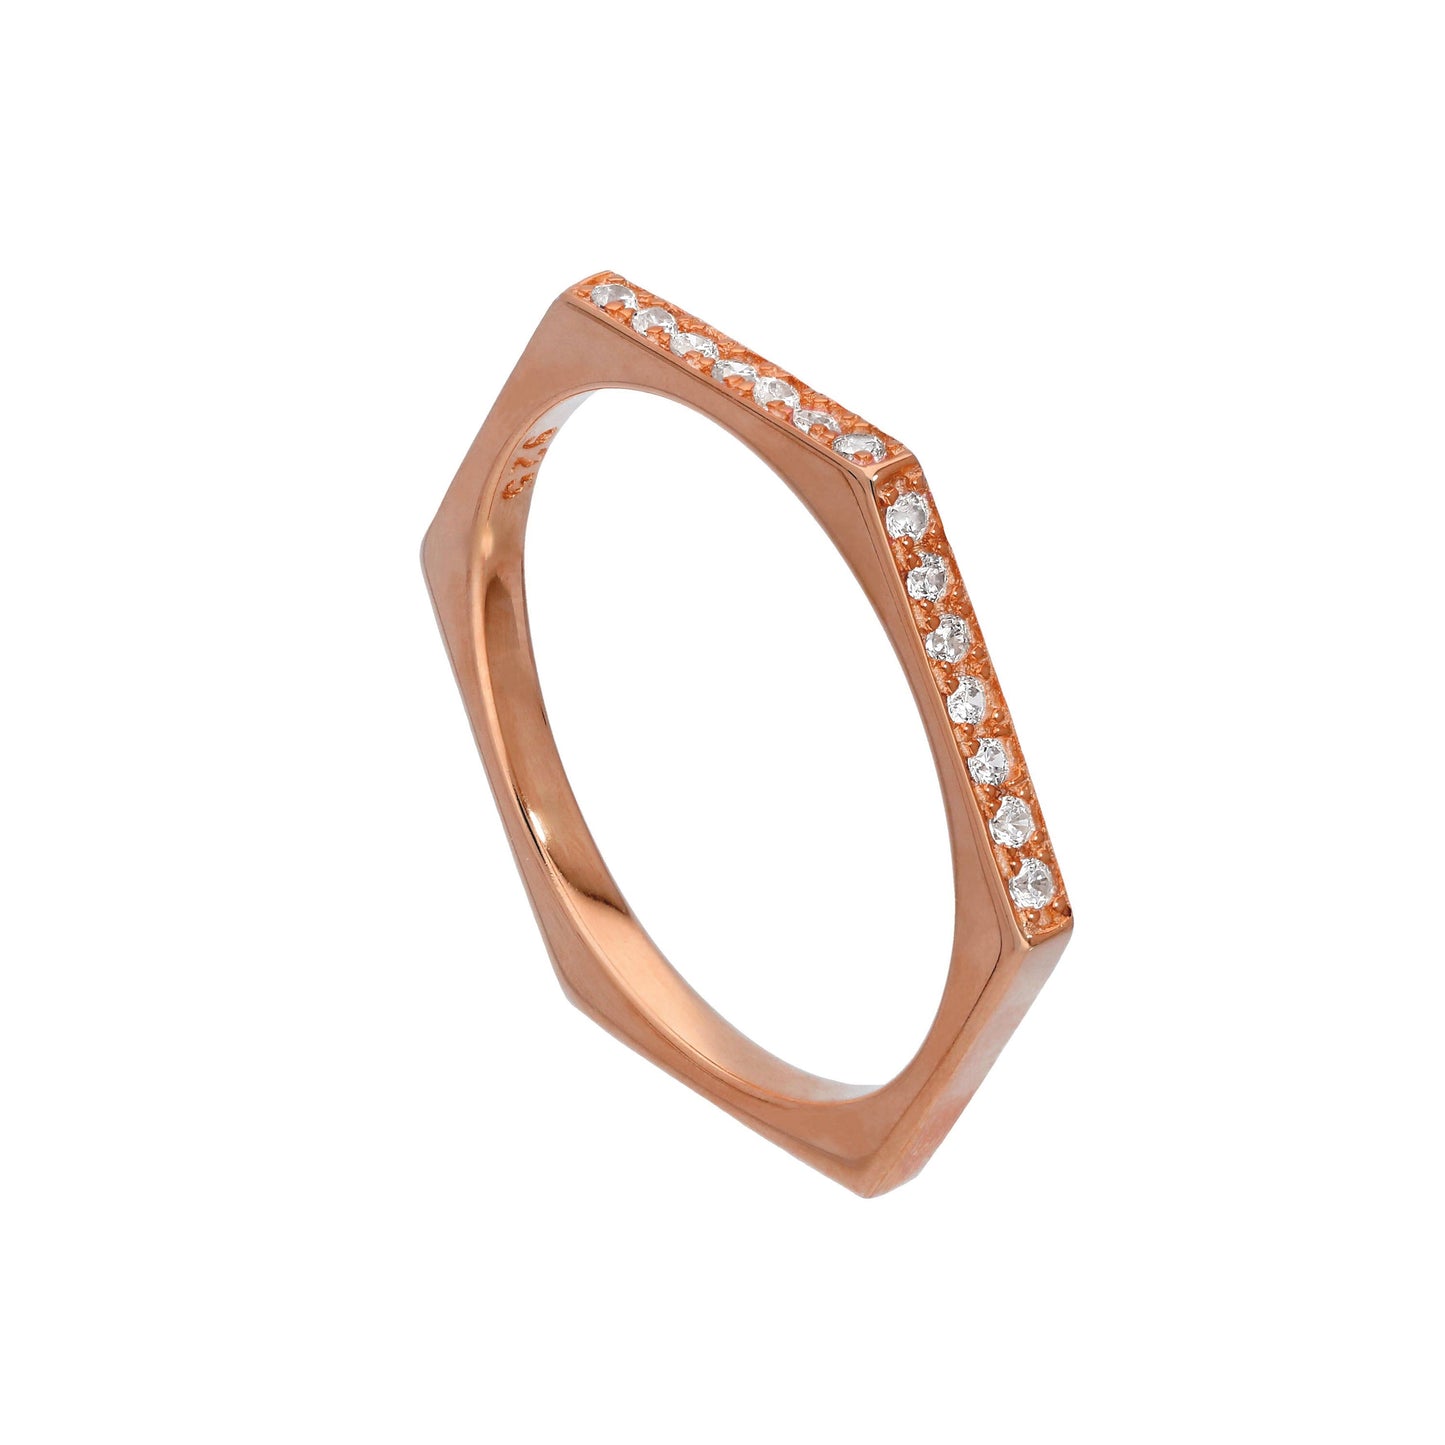 Rose Gold Plated Sterling Silver & Clear CZ Crystals Hexagon Ring Size O